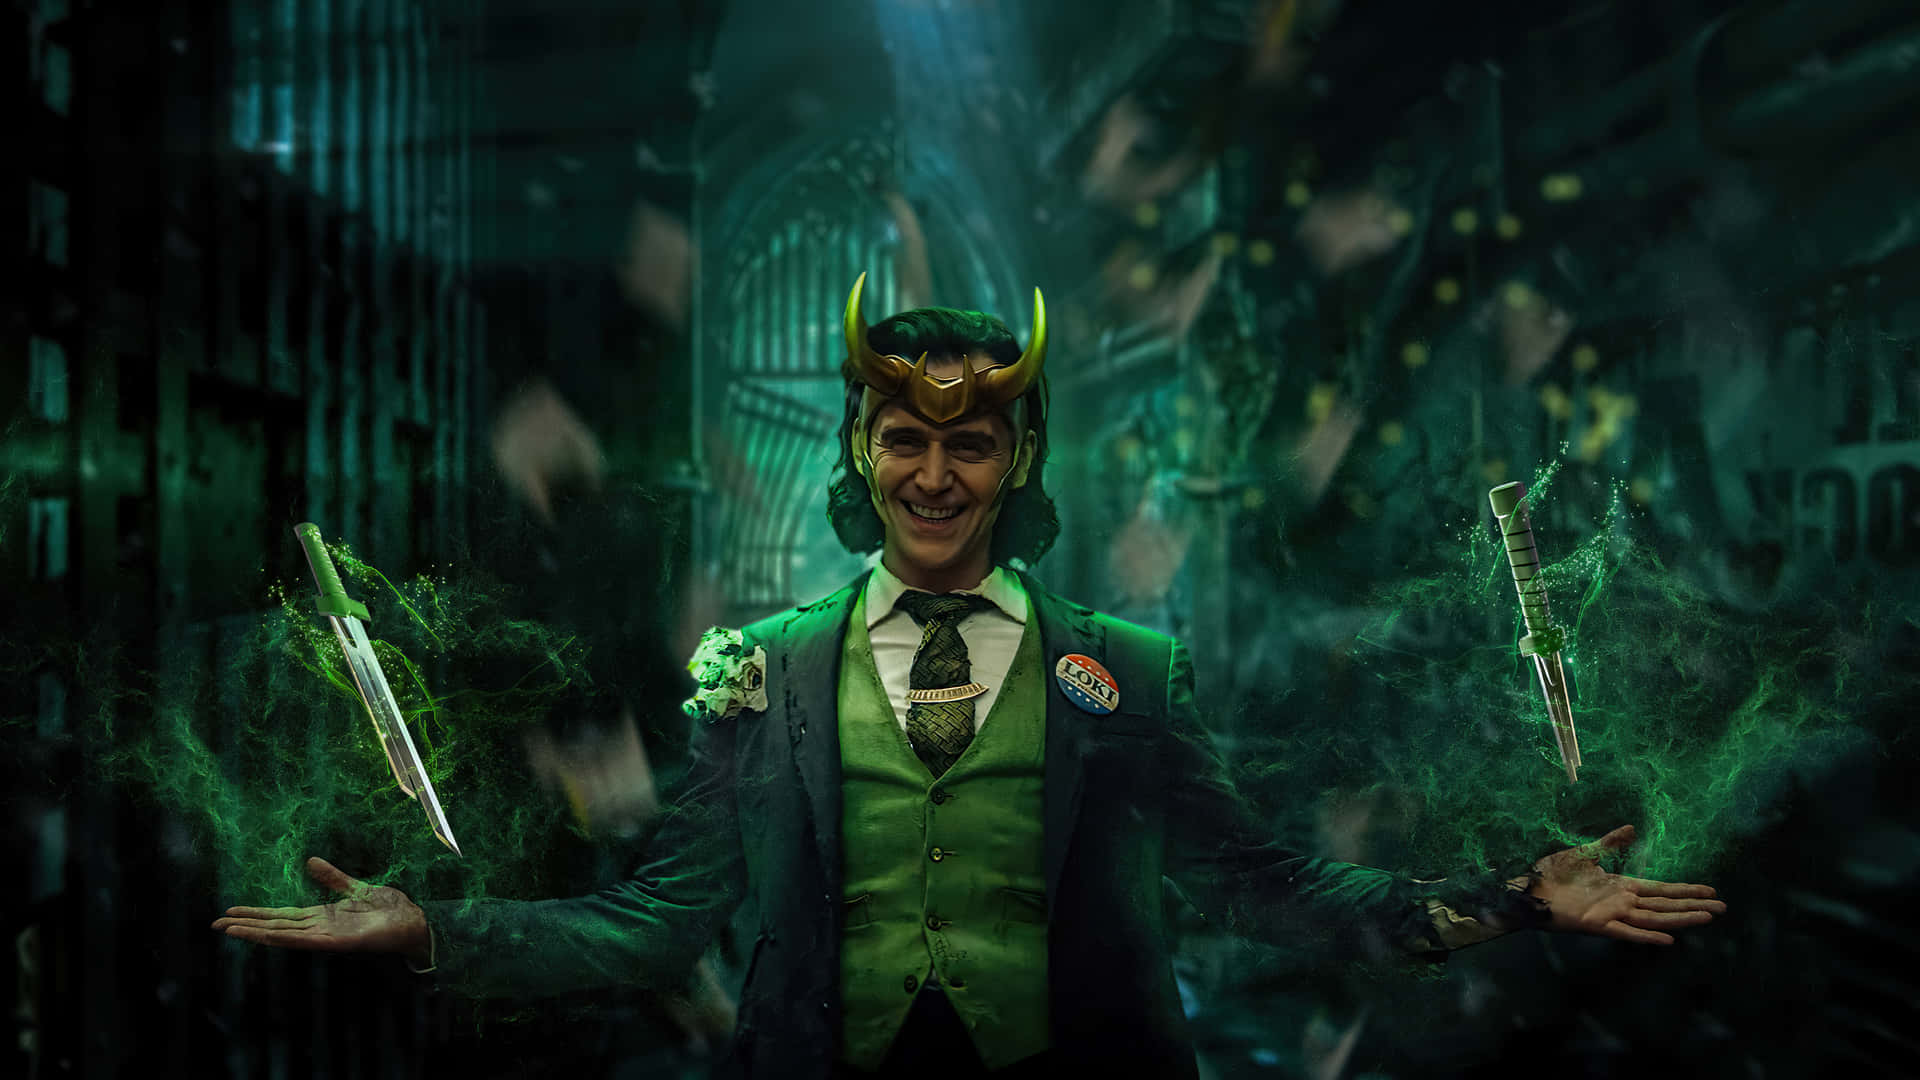 Tom Hiddleston as the Notorious Loki in The Marvel Cinematic Universe Wallpaper